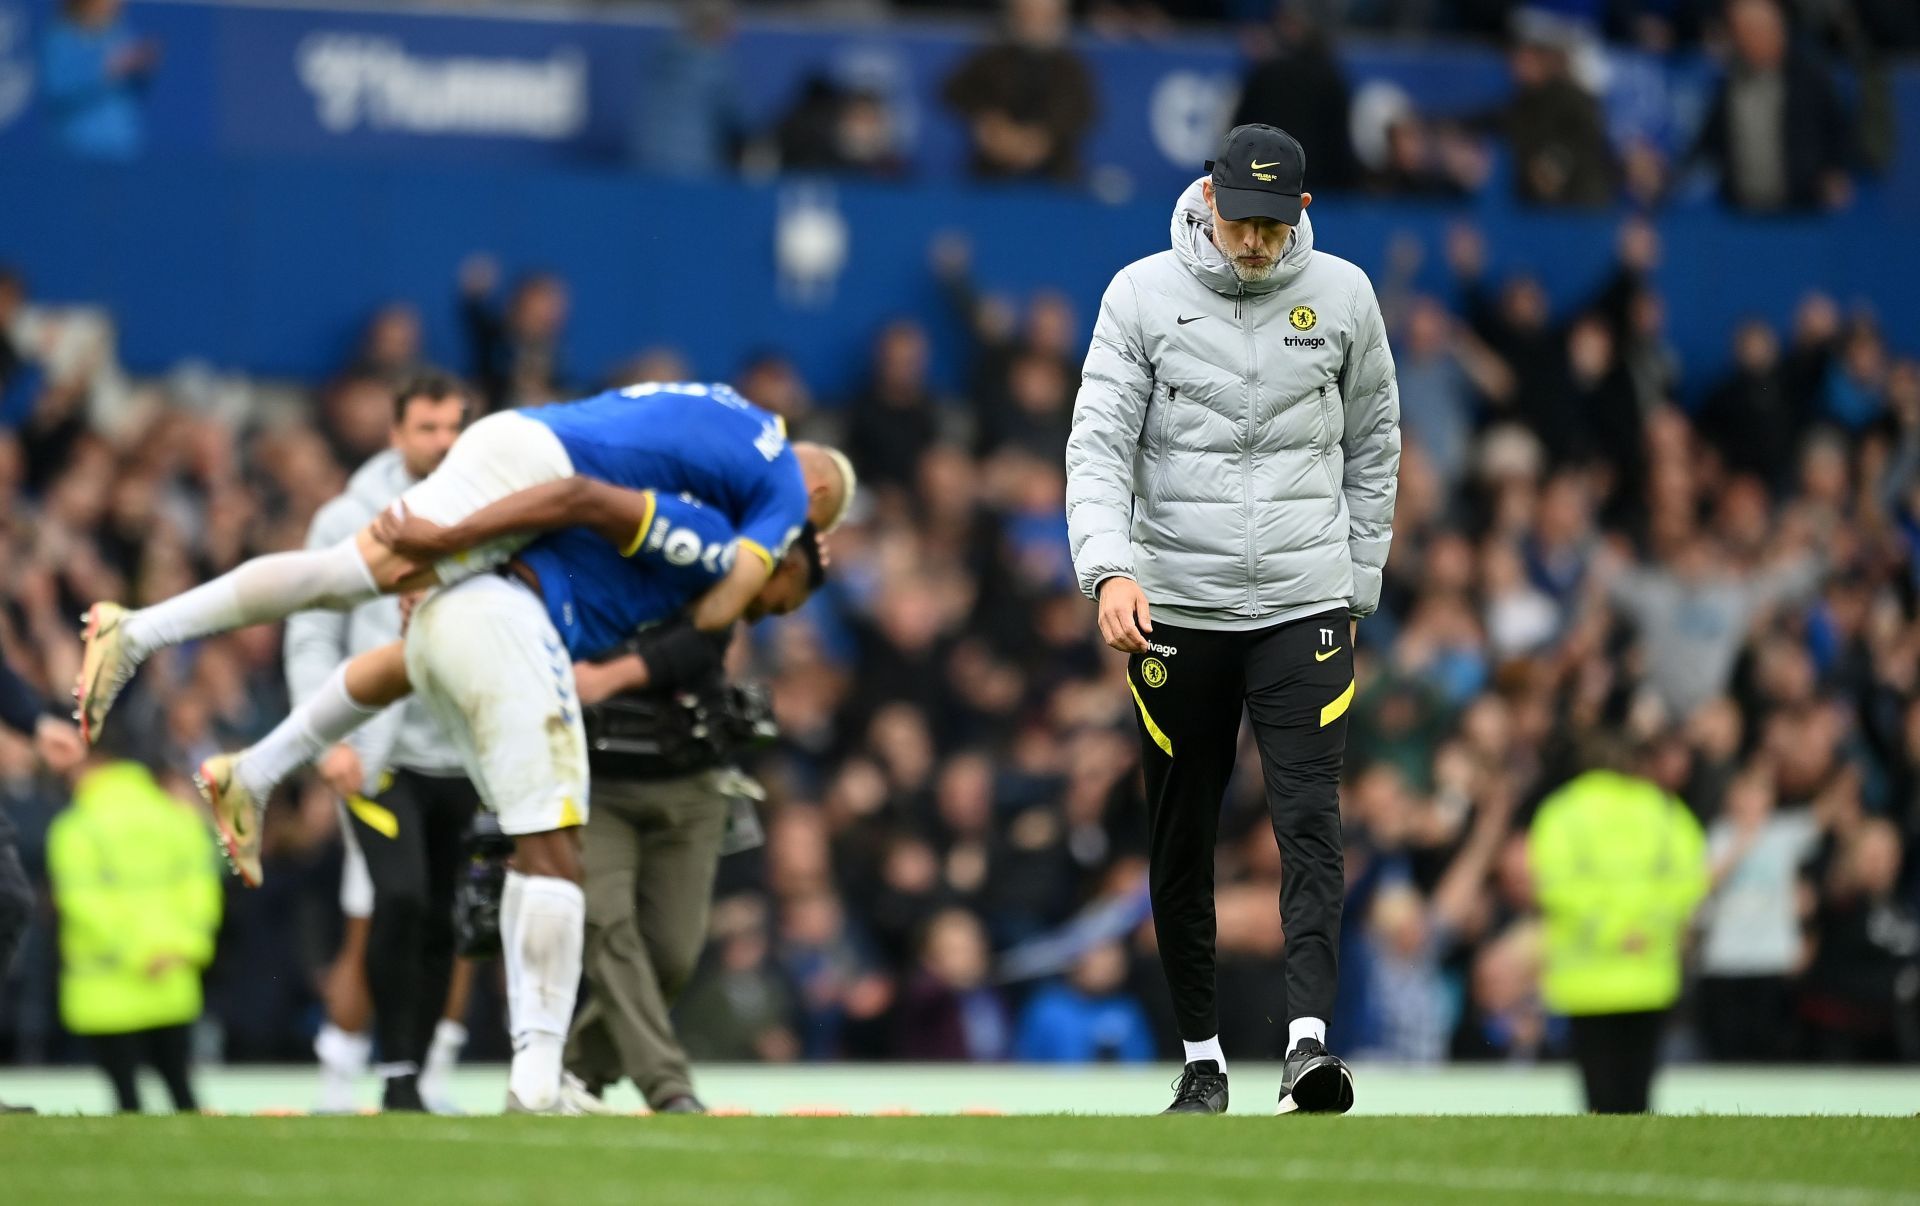 Thomas Tuchel will be left disappointed at the end of the season but the signs are there for the Blues to comeback roaring.